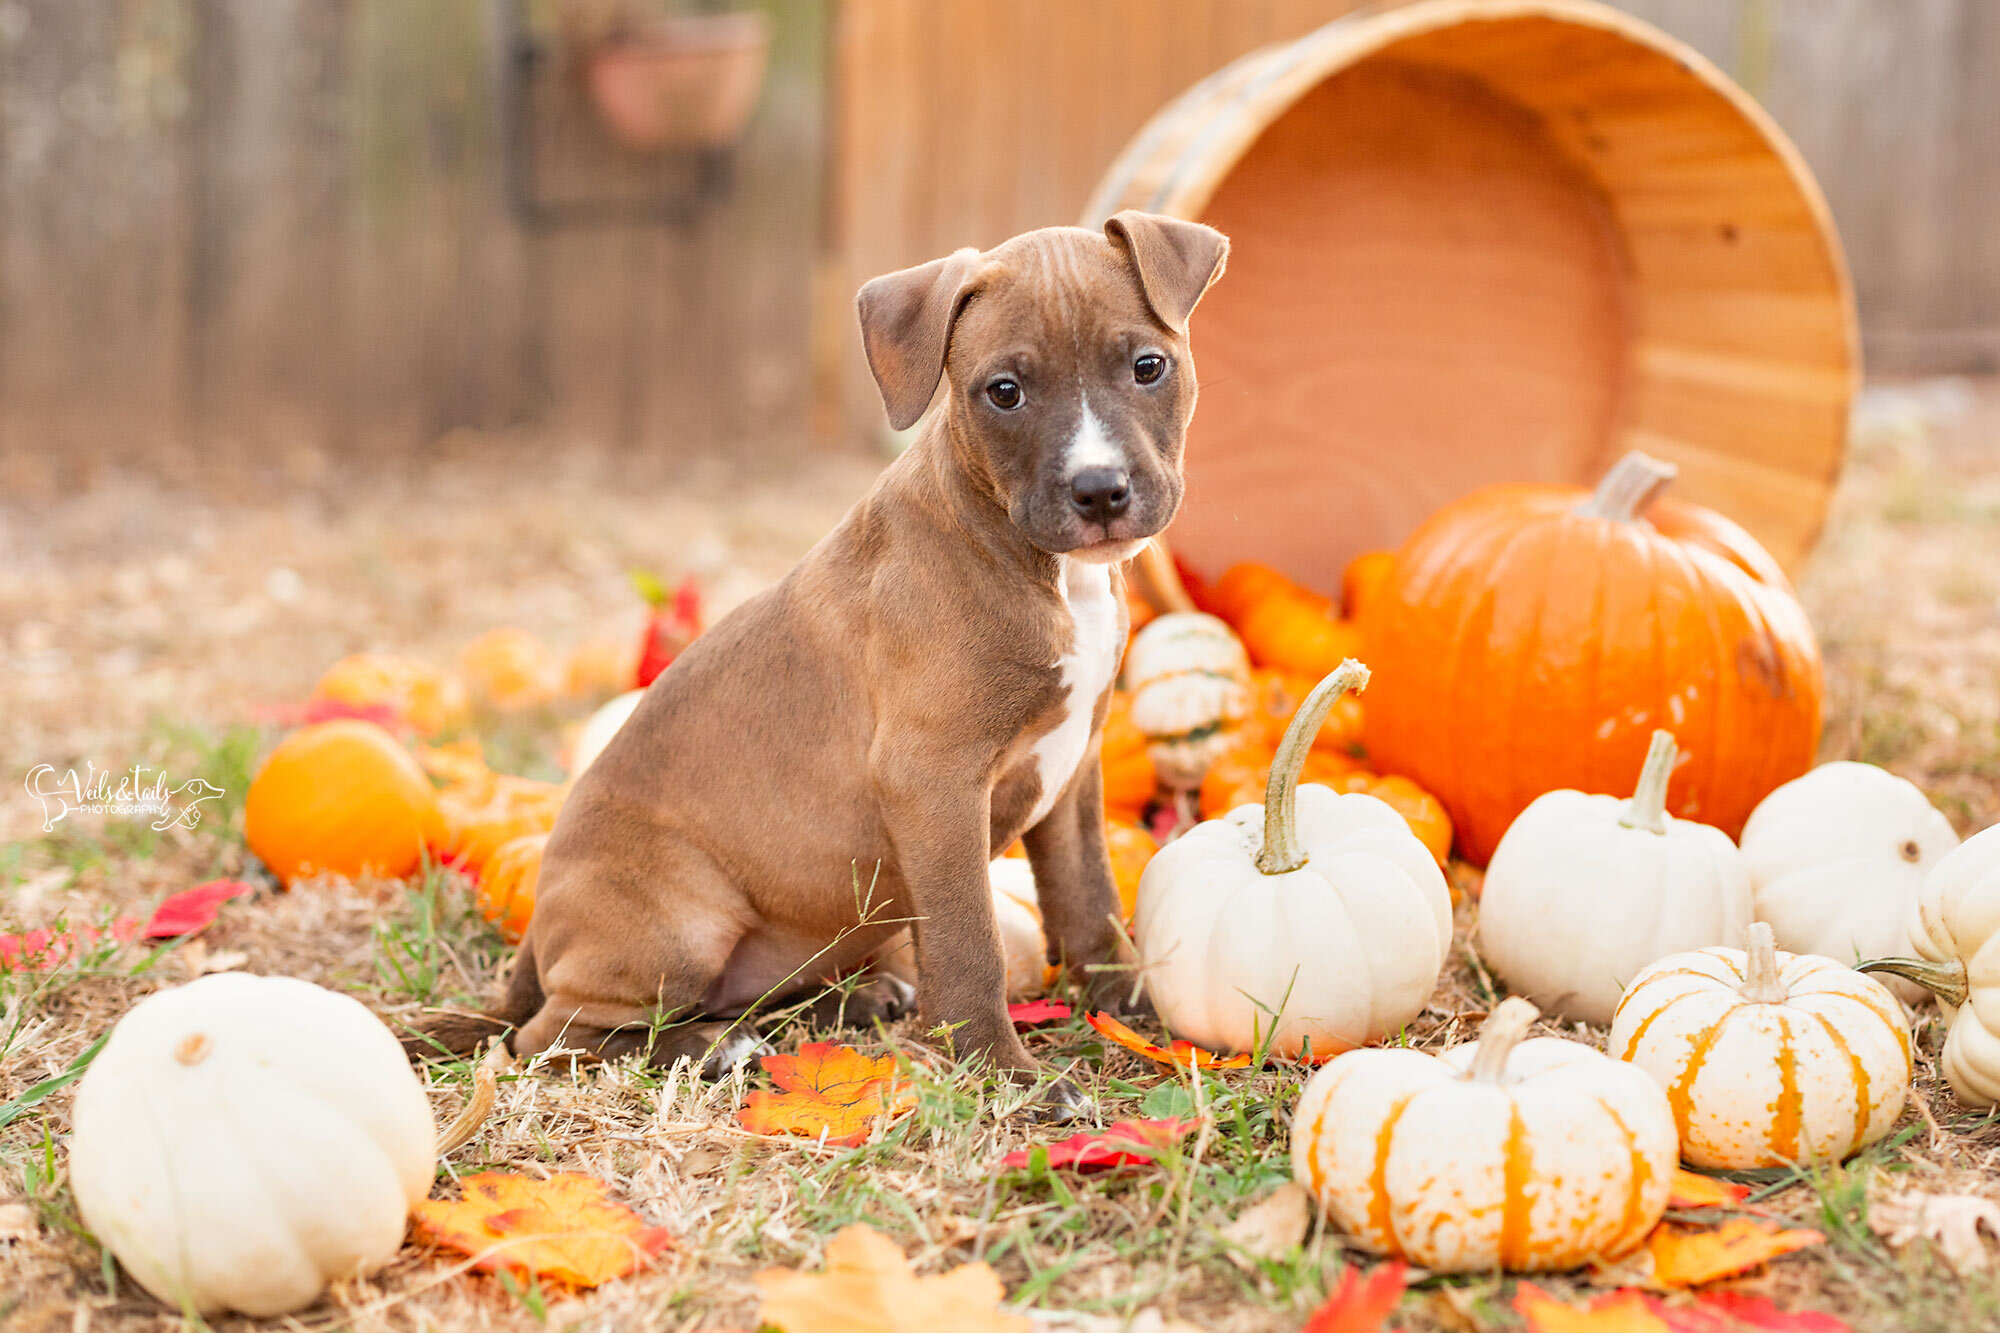 Rescue pit puppy, Southern California pet photographer